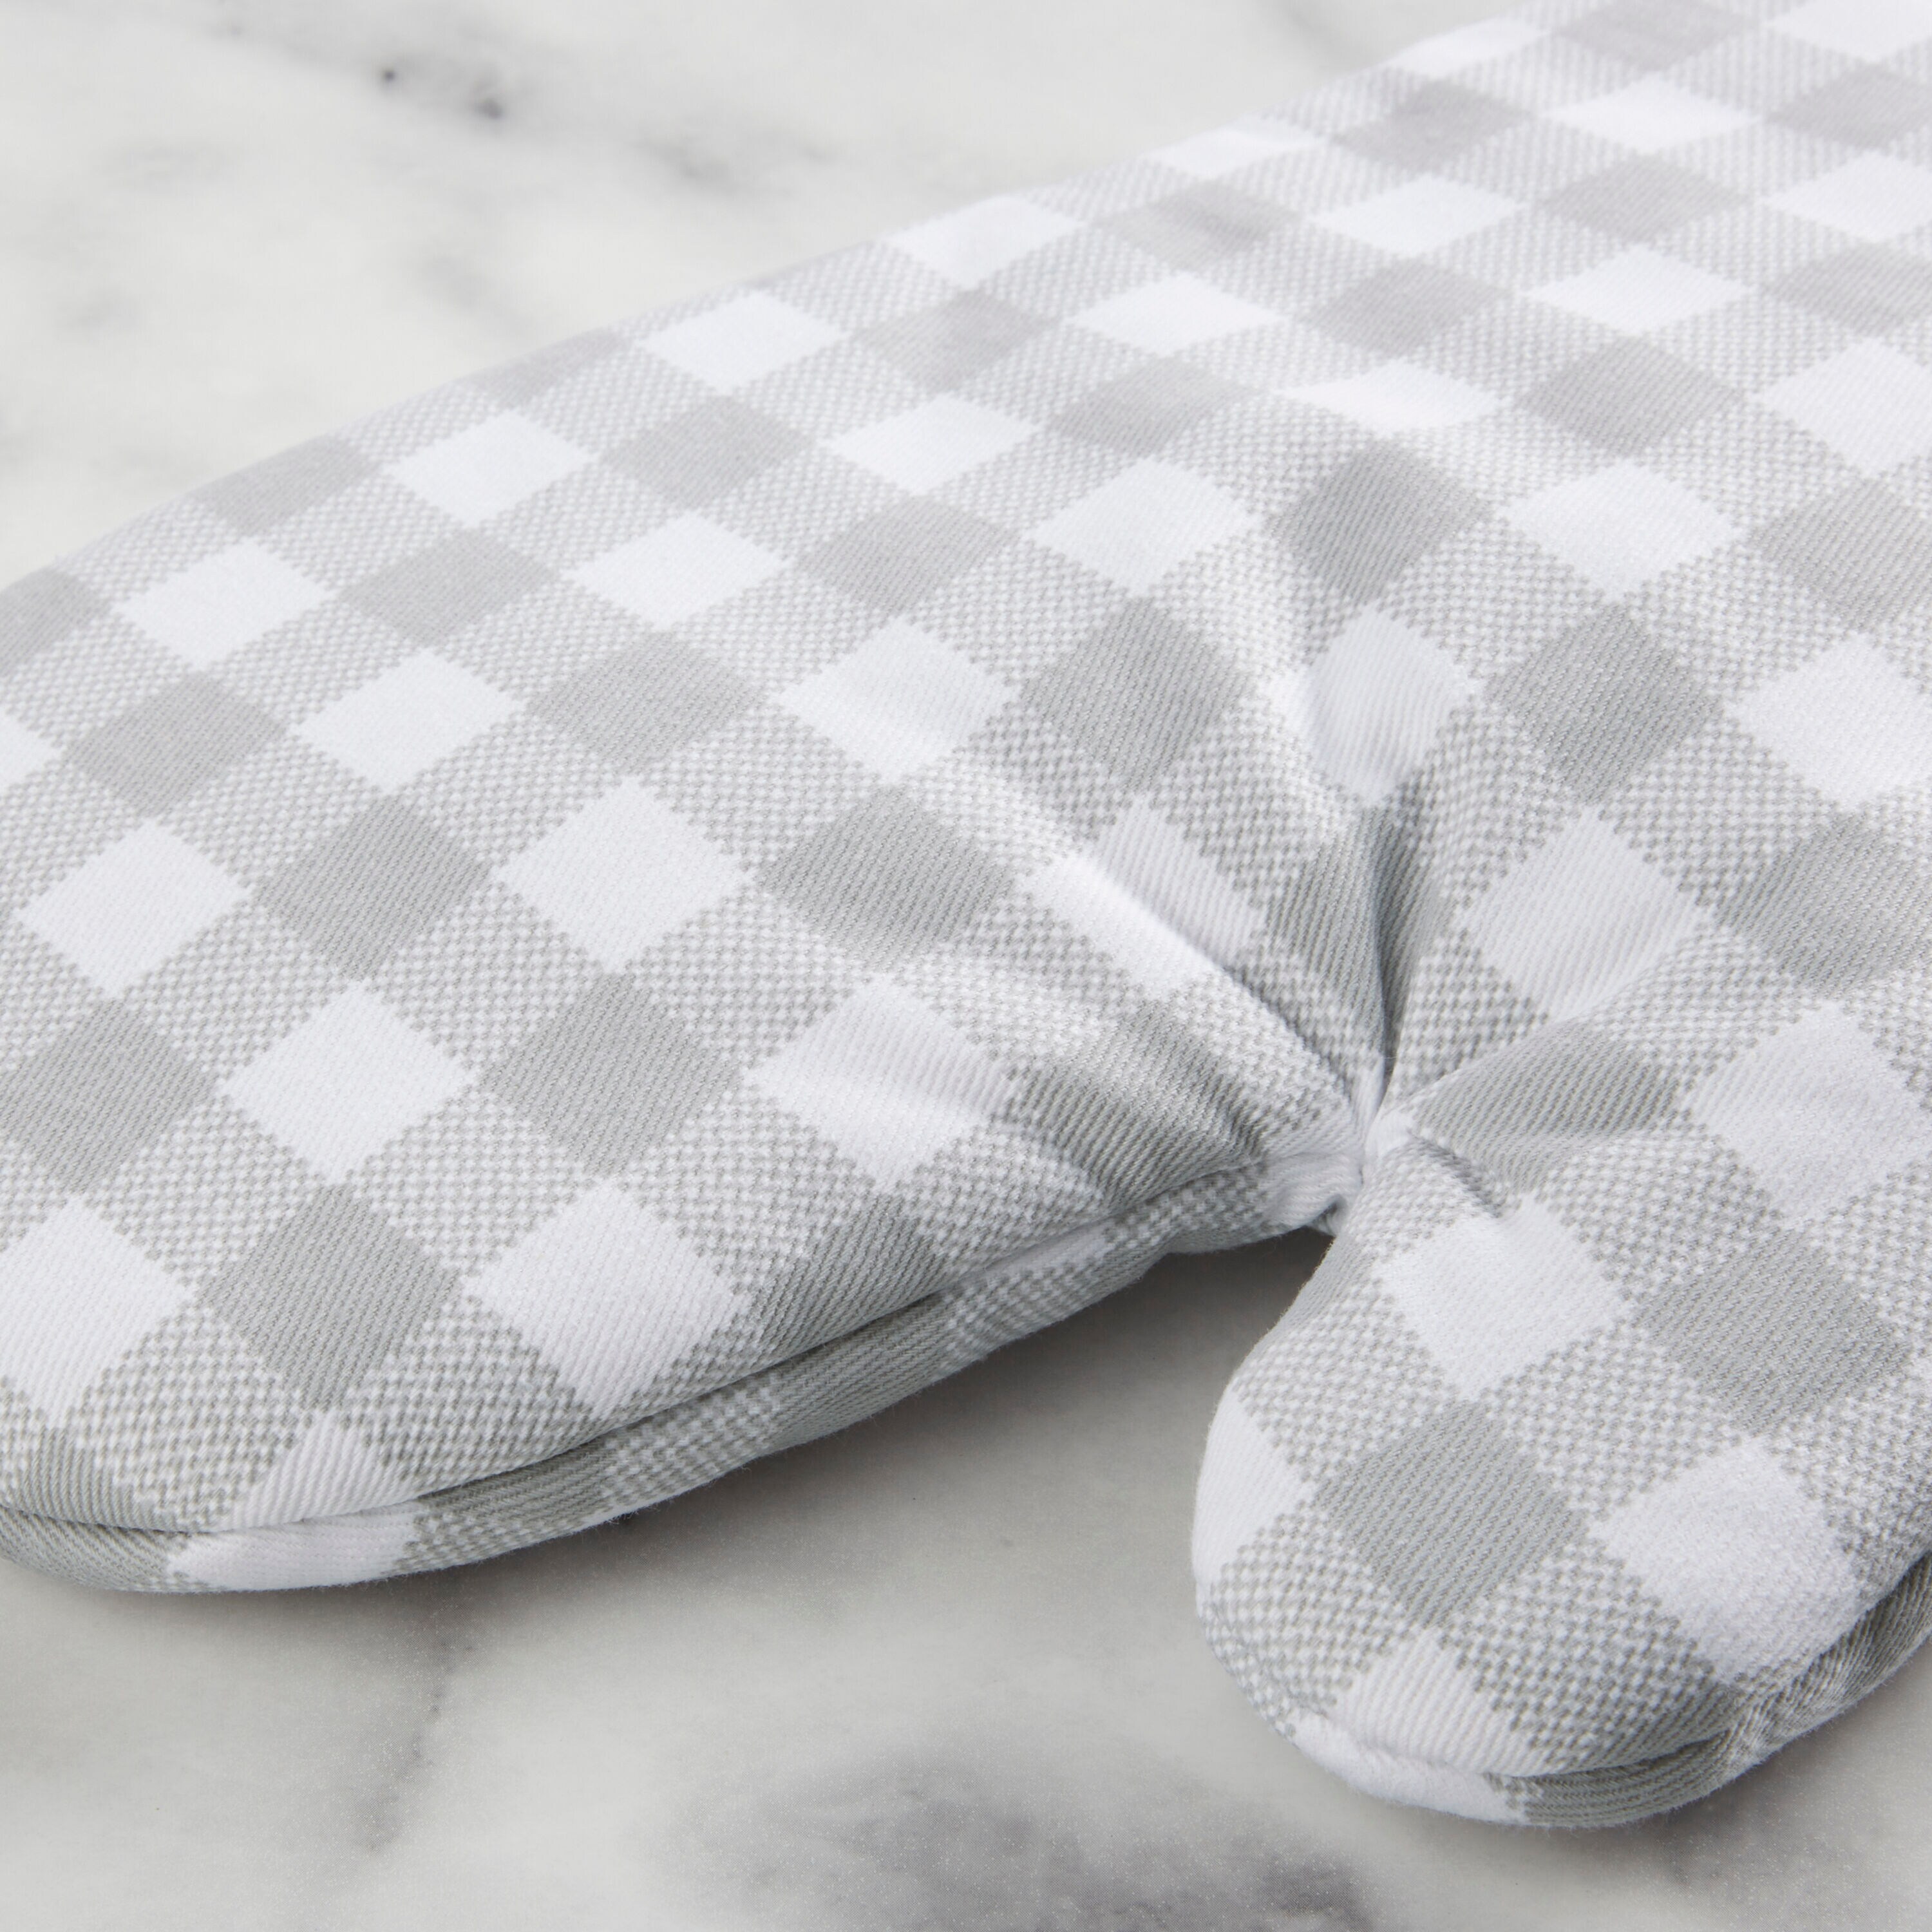 KitchenAid Gingham Oven Mitt Set - Heat Resistant Cotton - Matte Grey - Set  of 2 - Classic Checkered Pattern - 7-in x 13 in the Kitchen Towels  department at